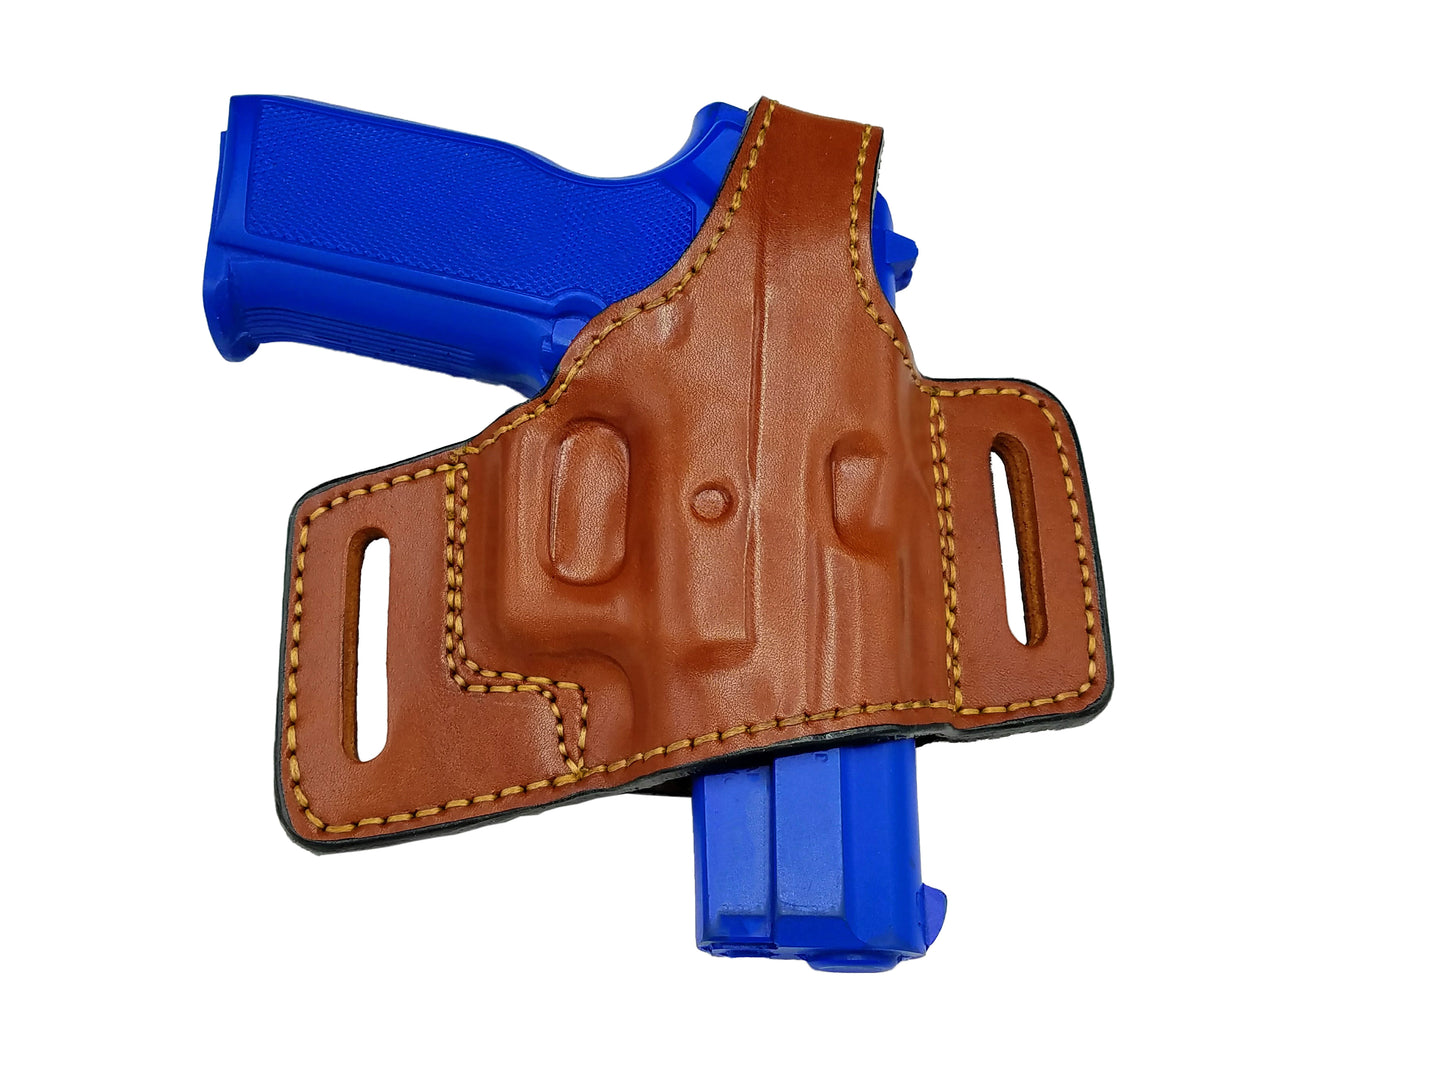 SIG Sauer P226, P220 OWB Quick Draw Leather Slide Holster W/Thumb-Break